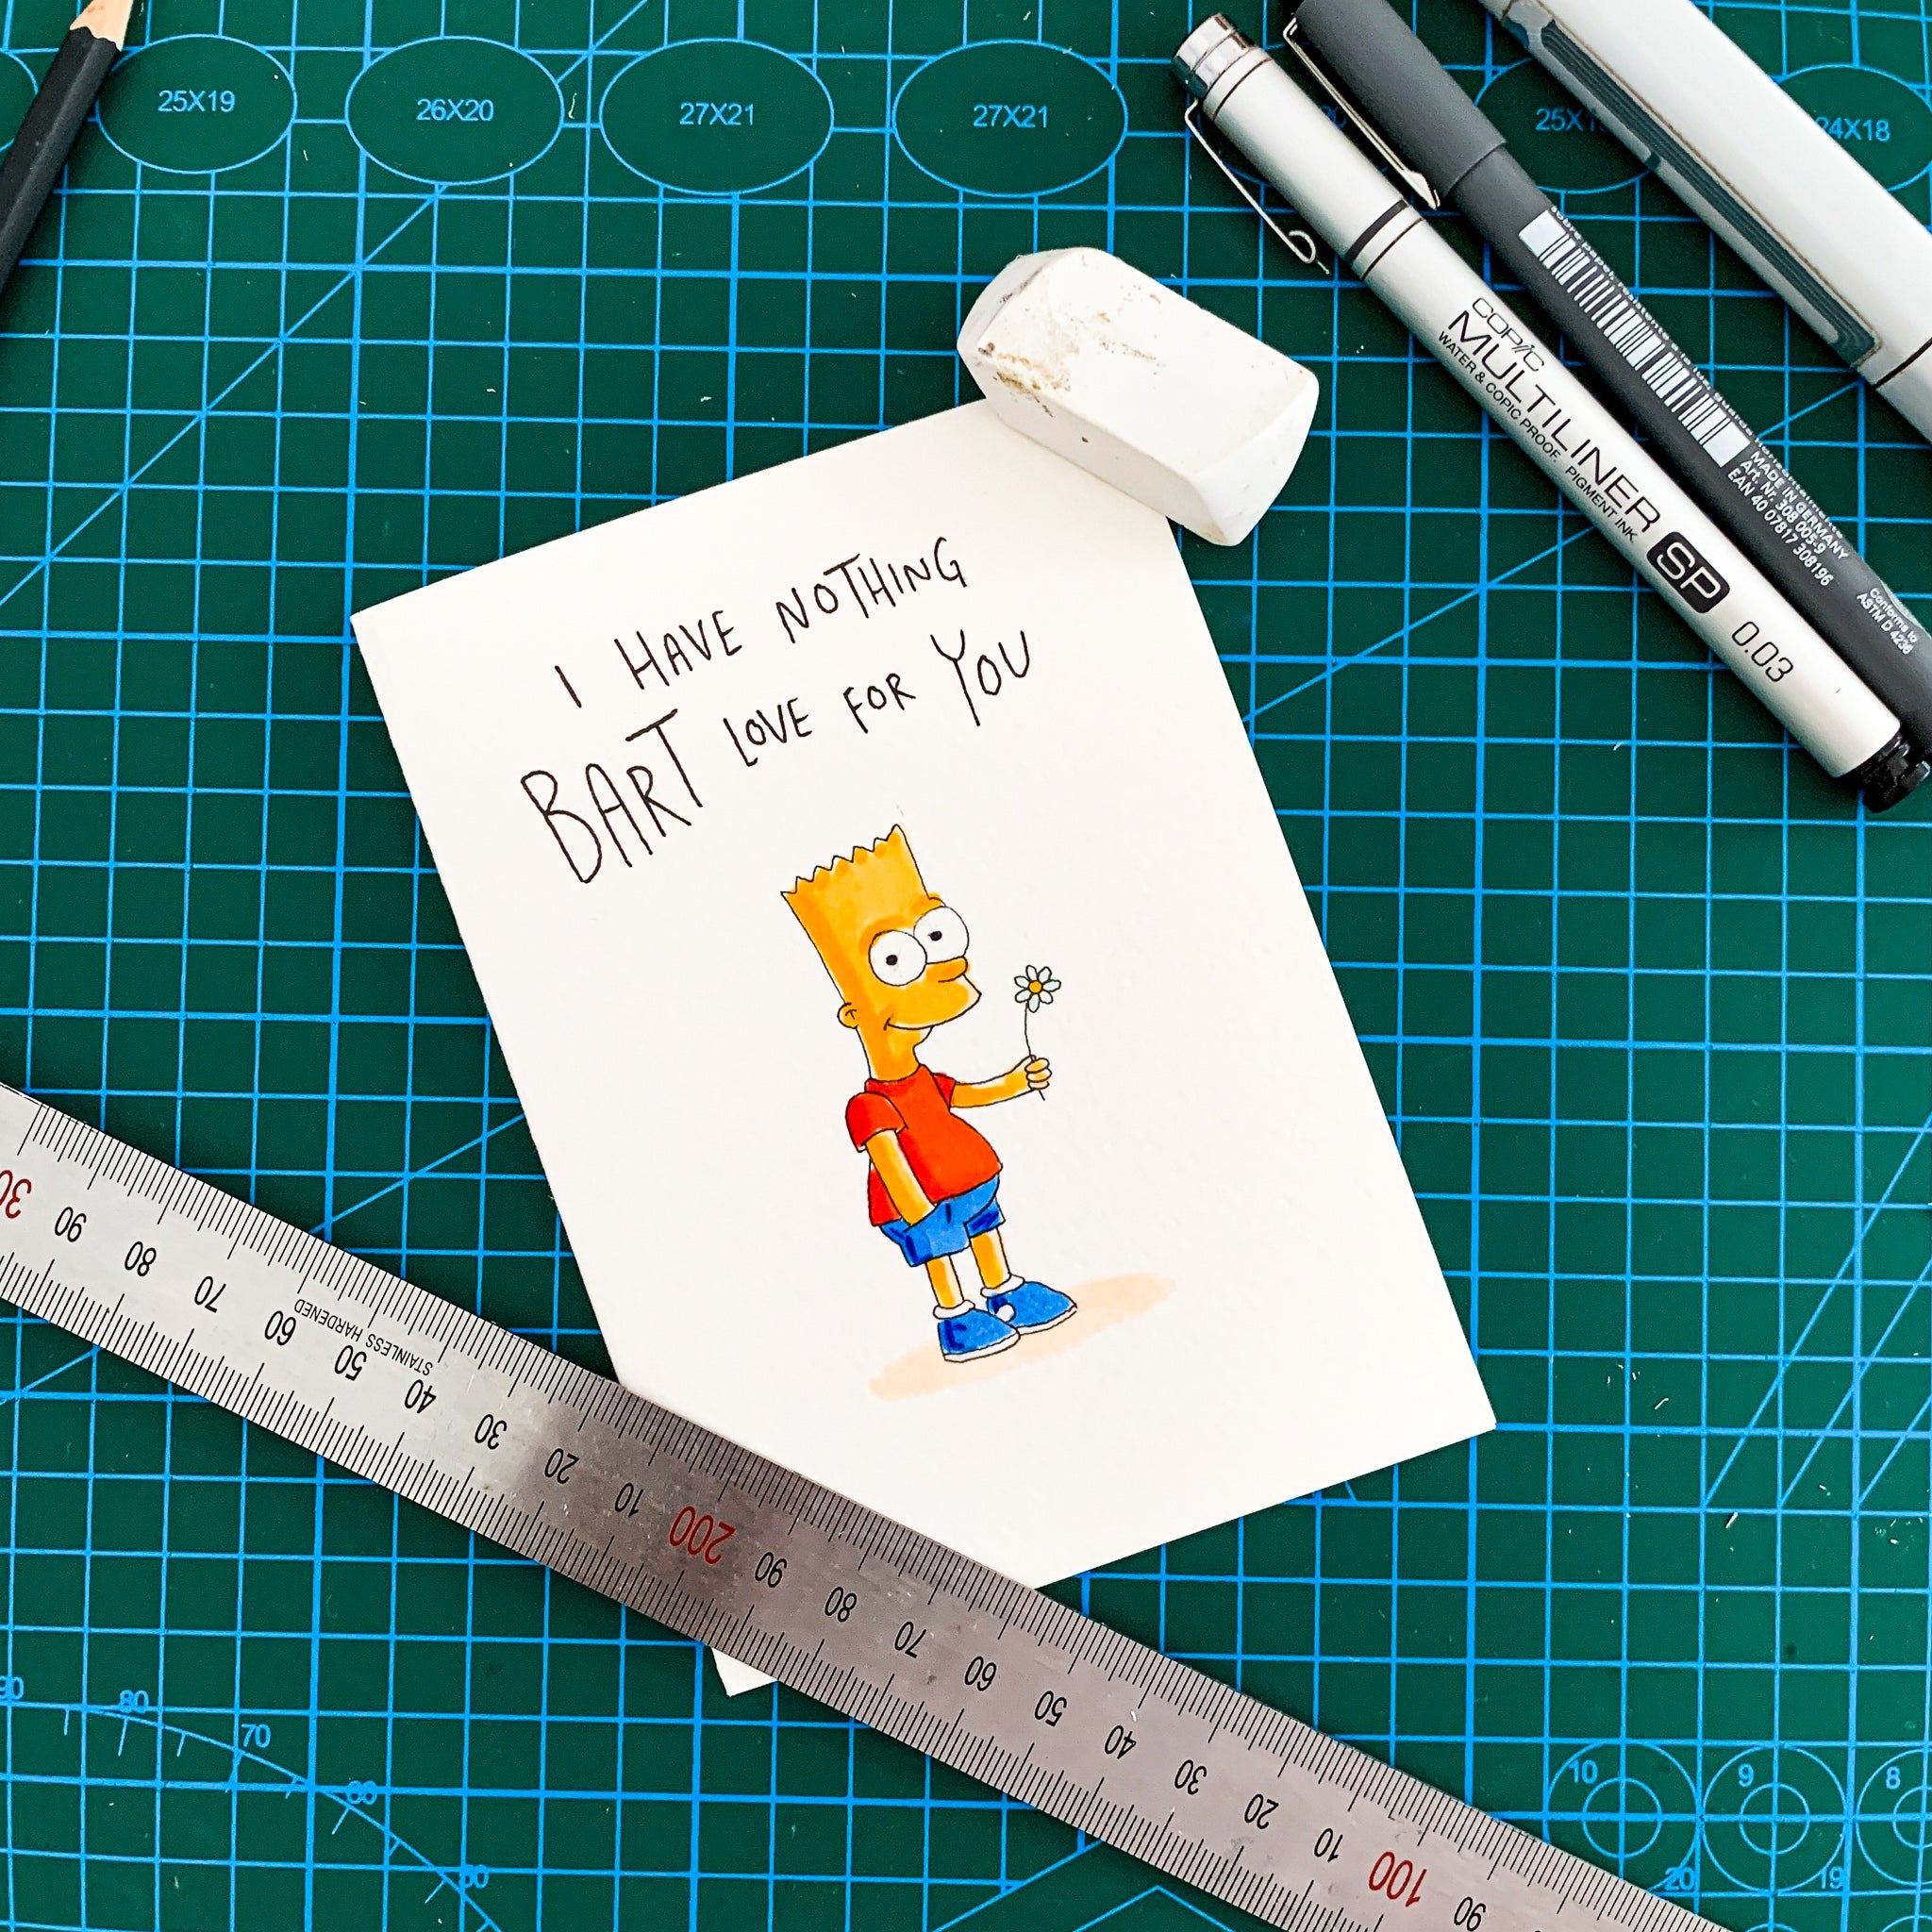 I Have Nothing Bart Love For You - Well Drawn